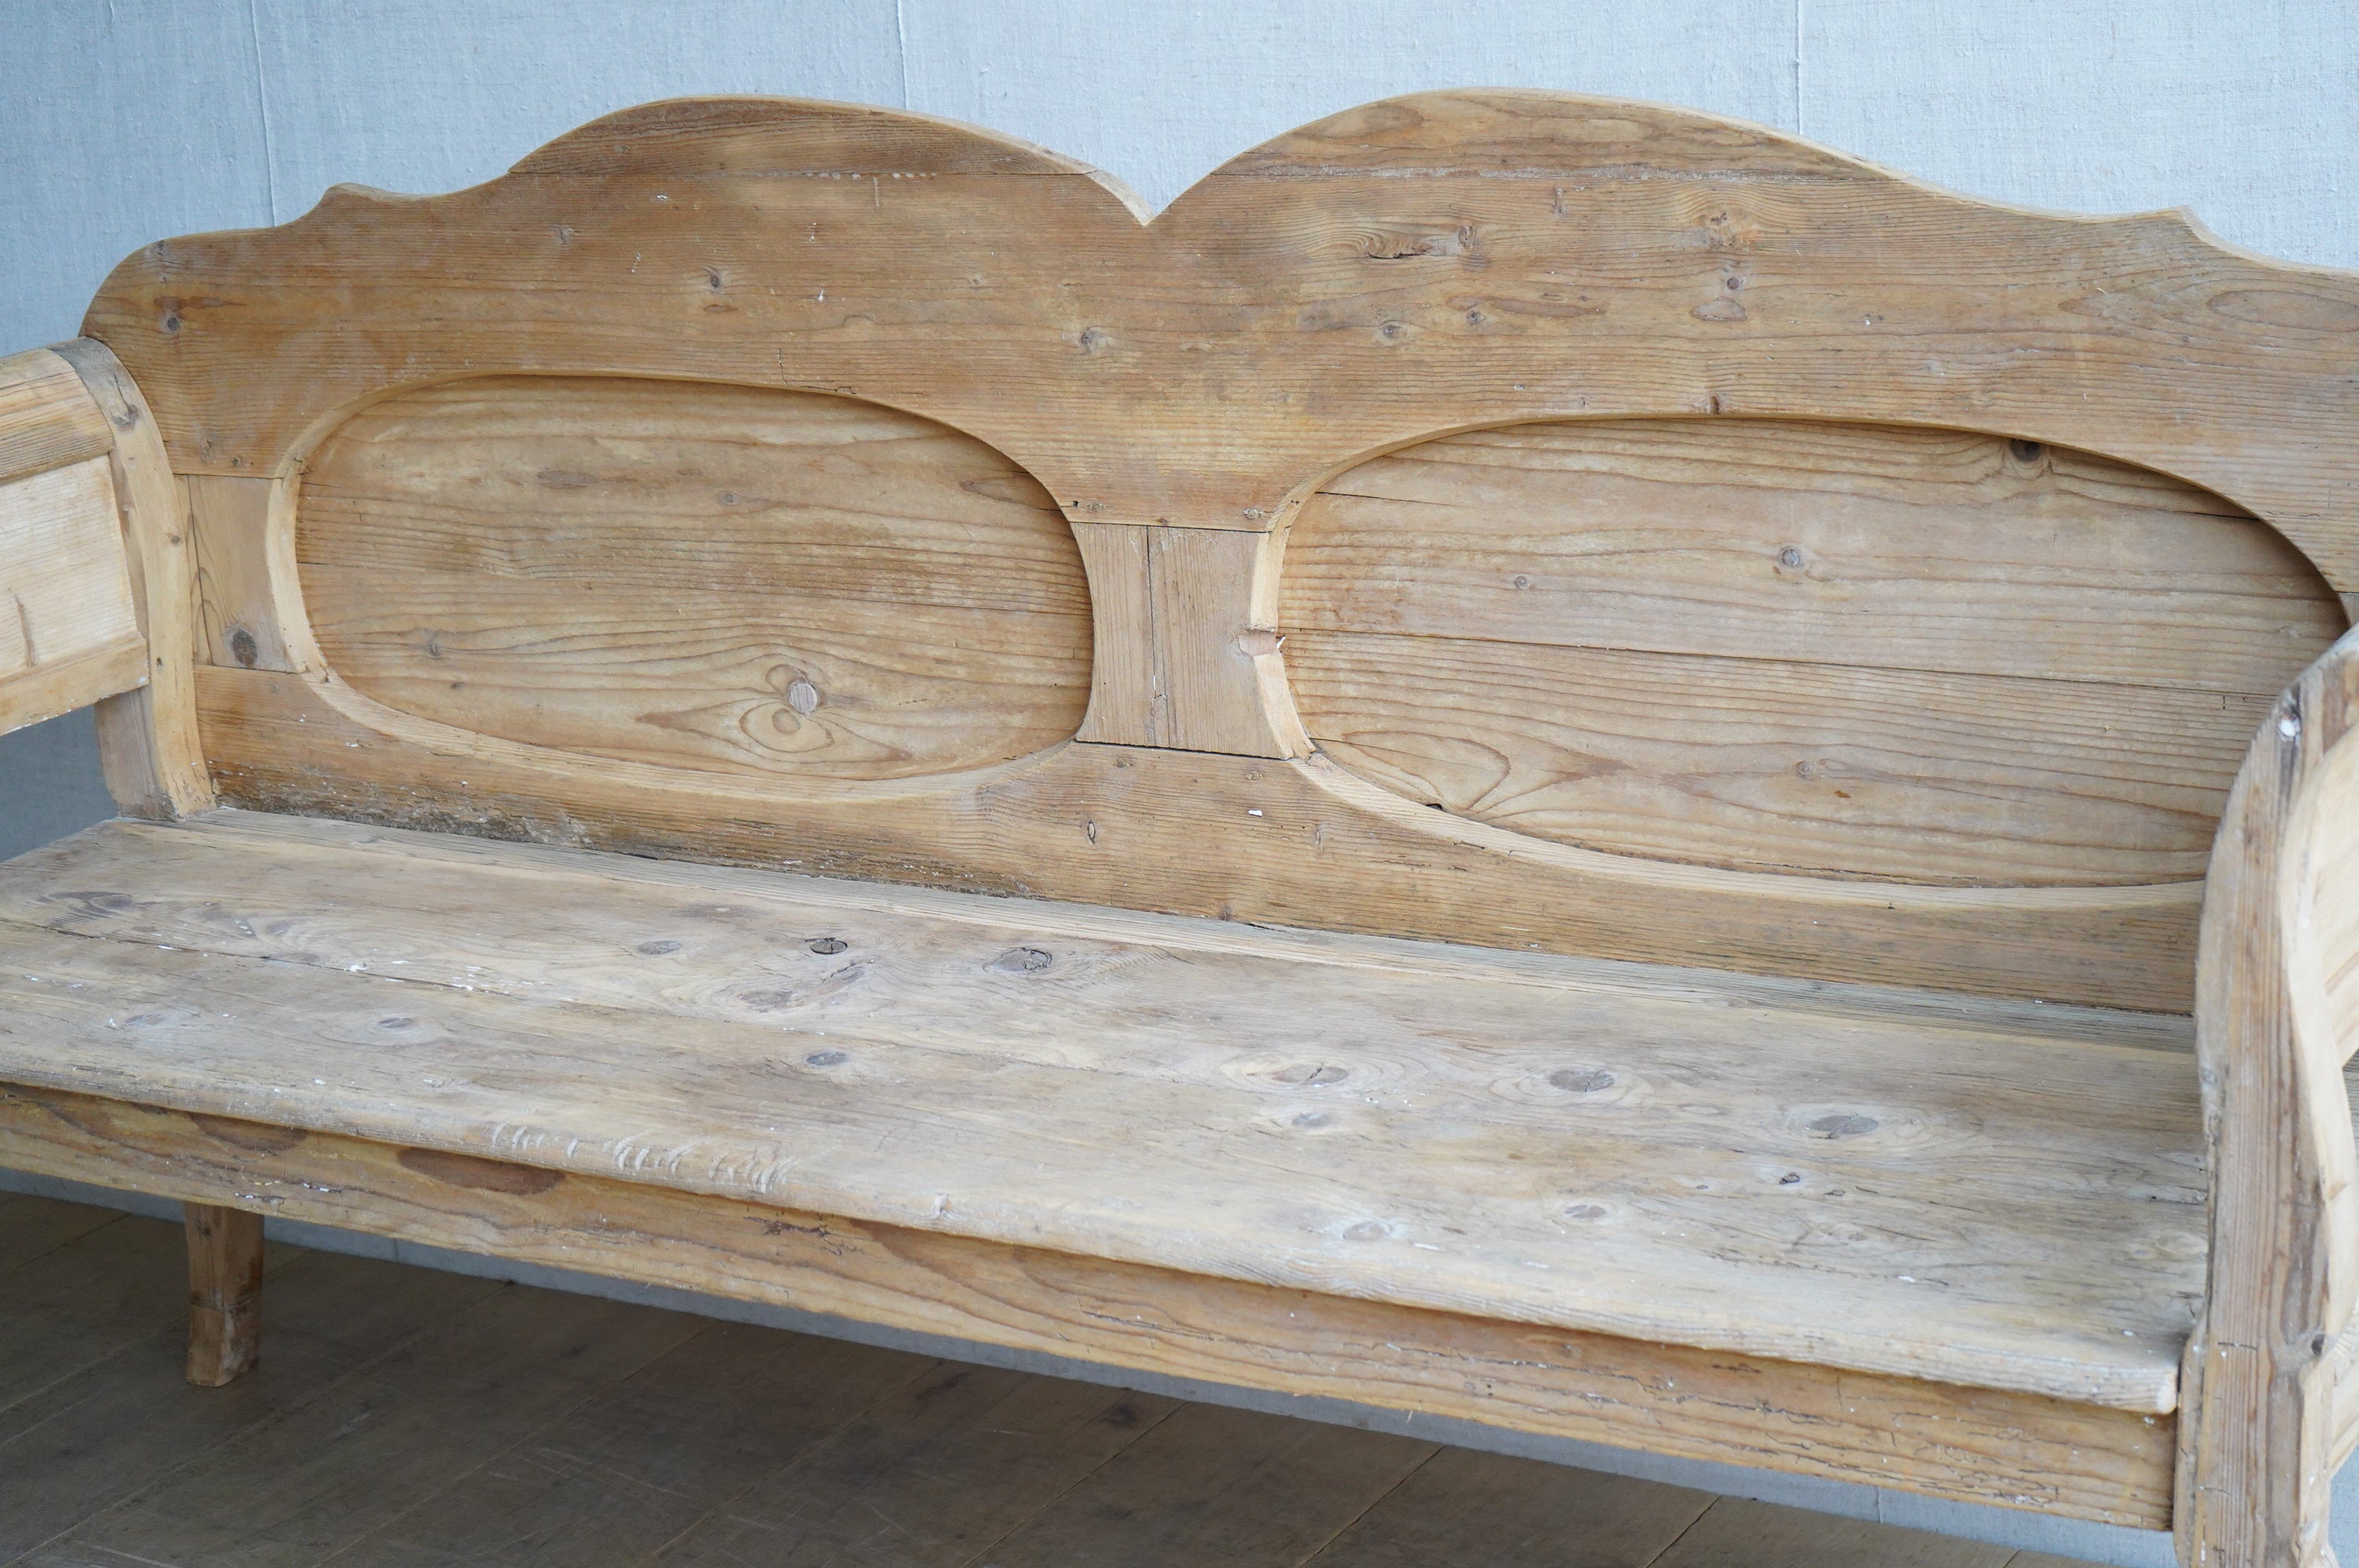 Stripped Hungarian Bench